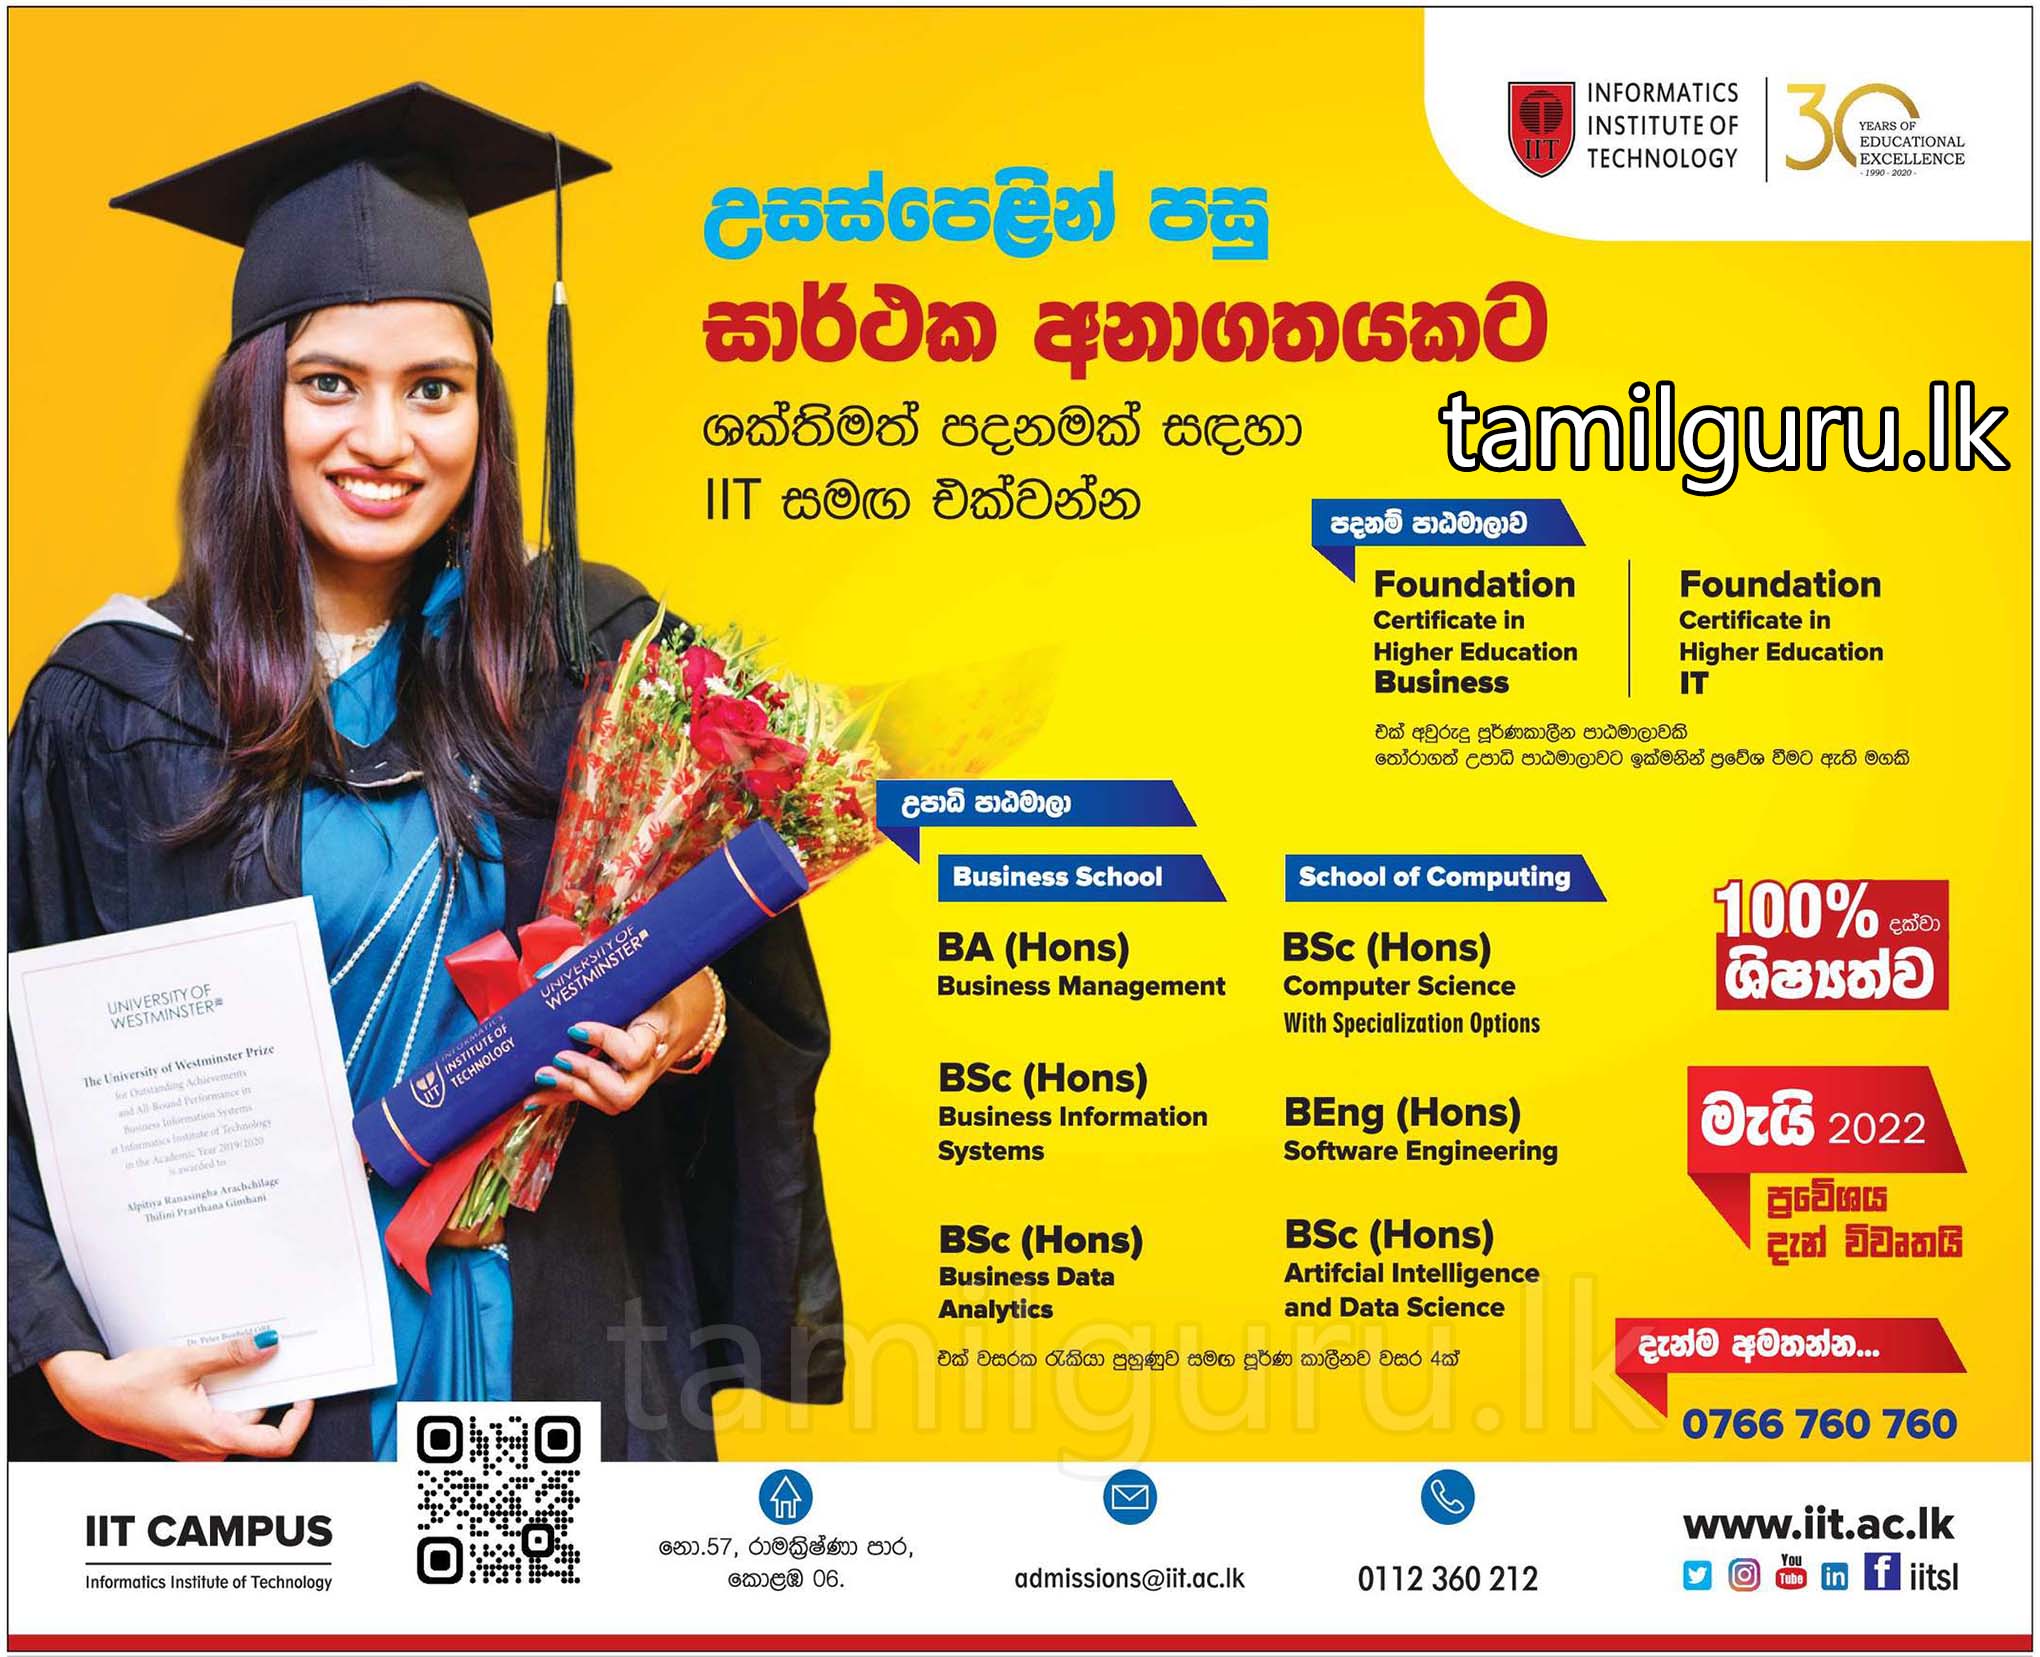 Informatics Institute of Technology (IIT) Campus - Admission for Degree Programmes (May 2022 Intake)
